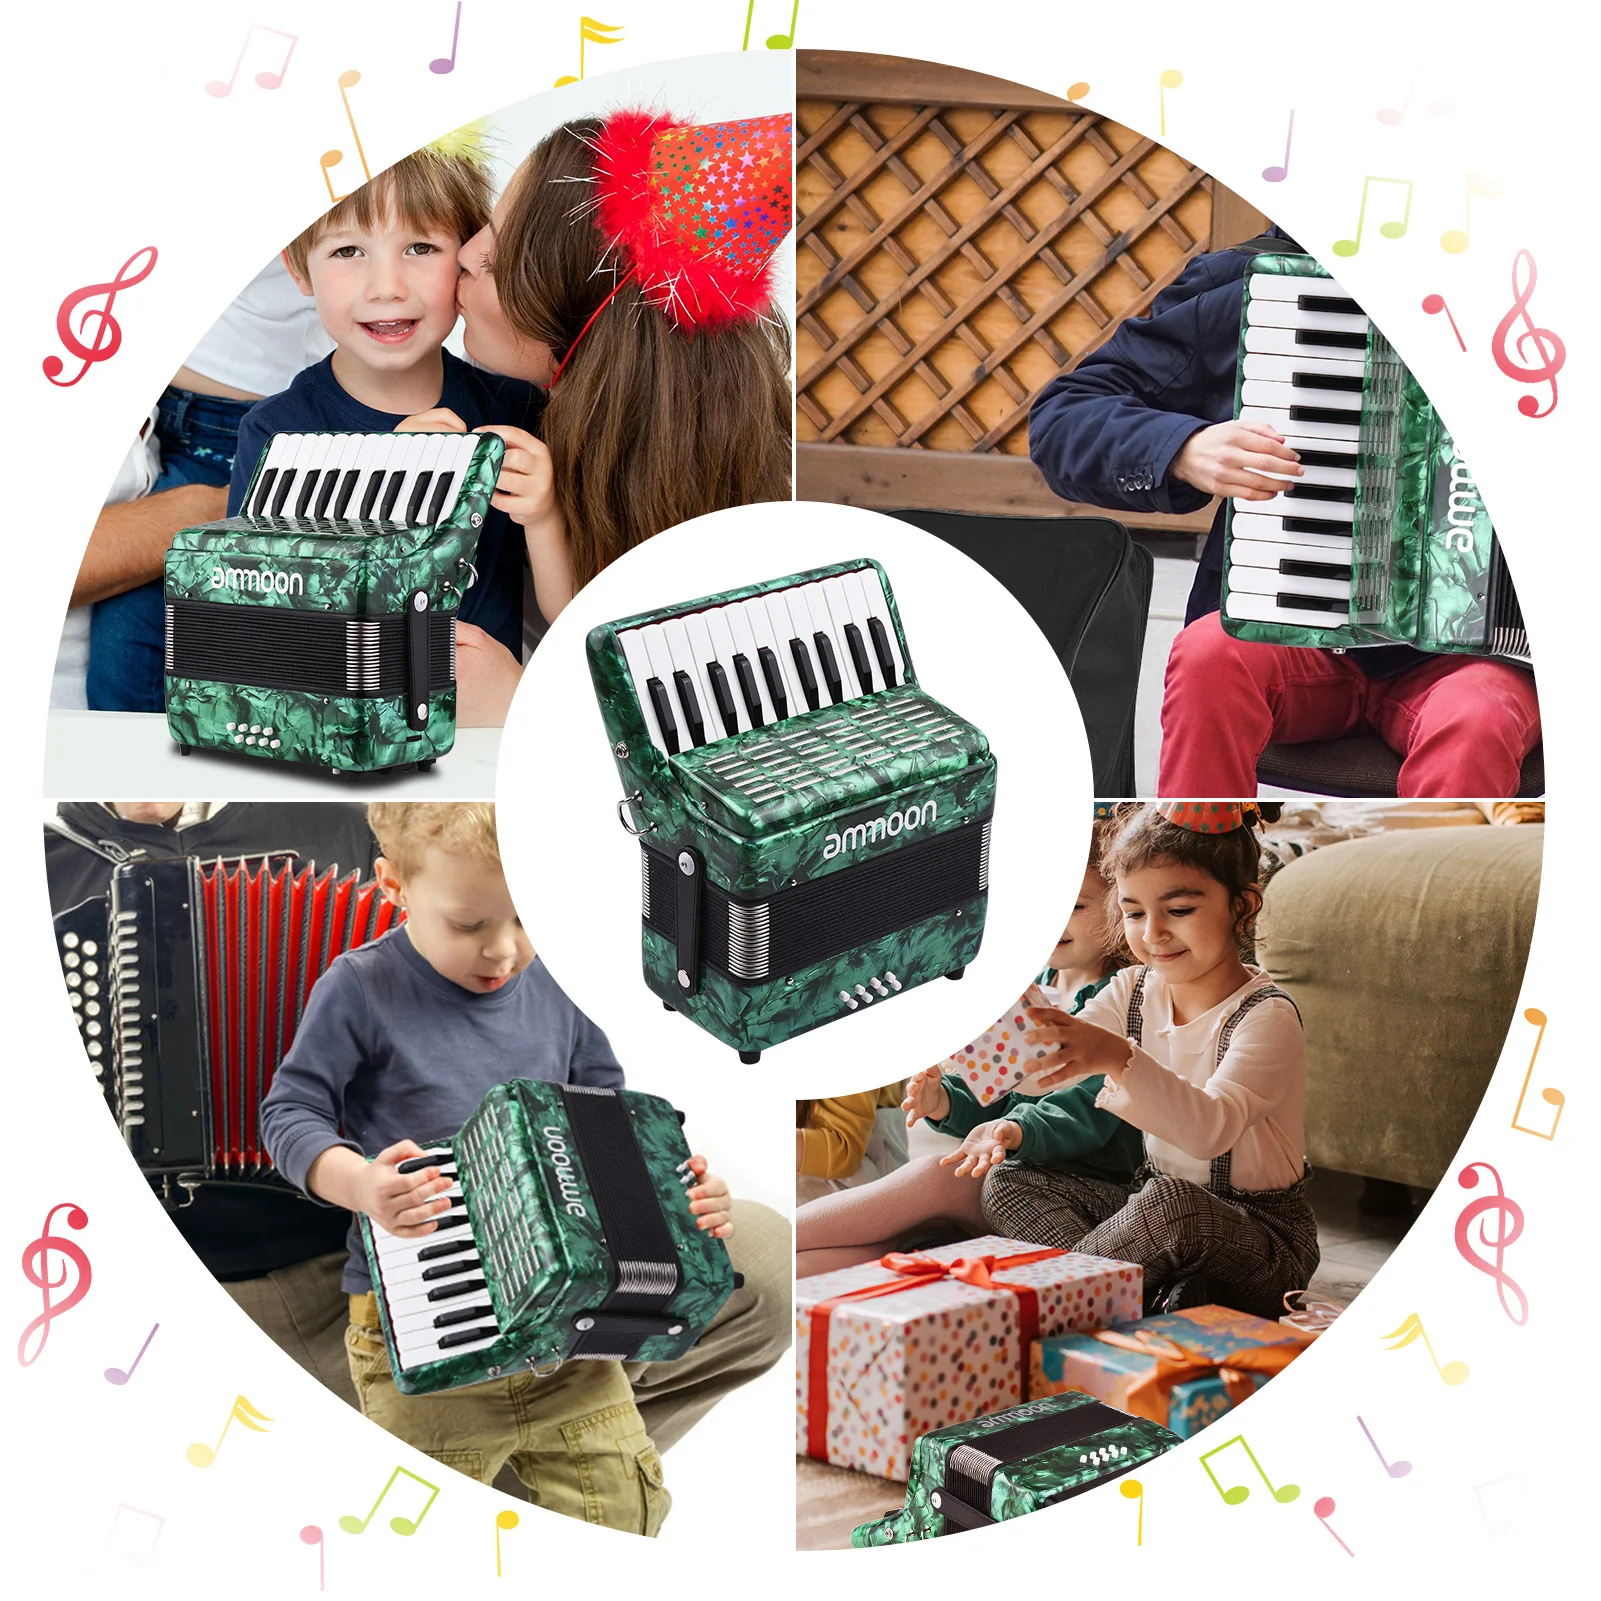 

ammoon 22 Keys 8 Bass Piano Accordion with Adjustable Straps Gig Bag Musical Instrument for Kids Beginners